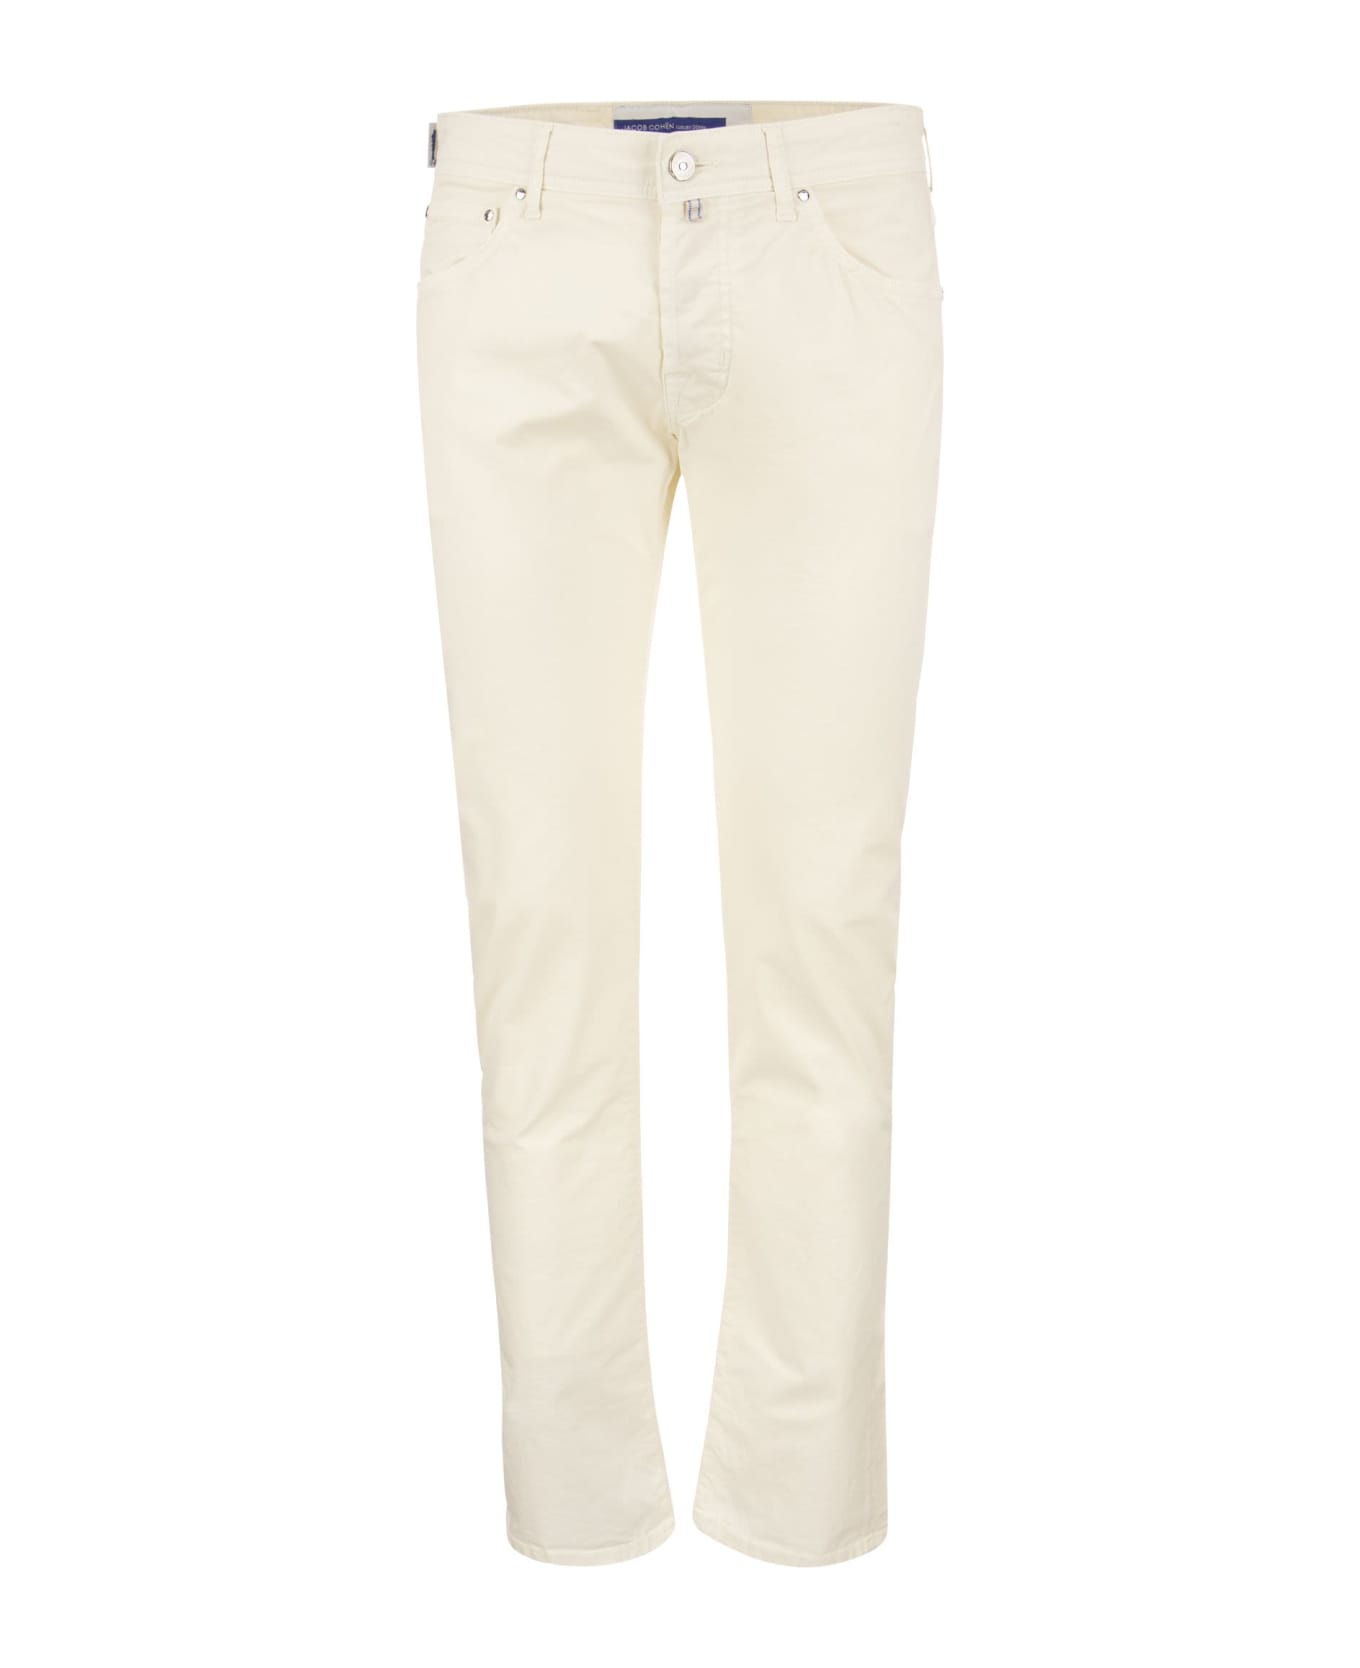 Jacob Cohen Five-pocket Jeans Trousers - Cream ボトムス